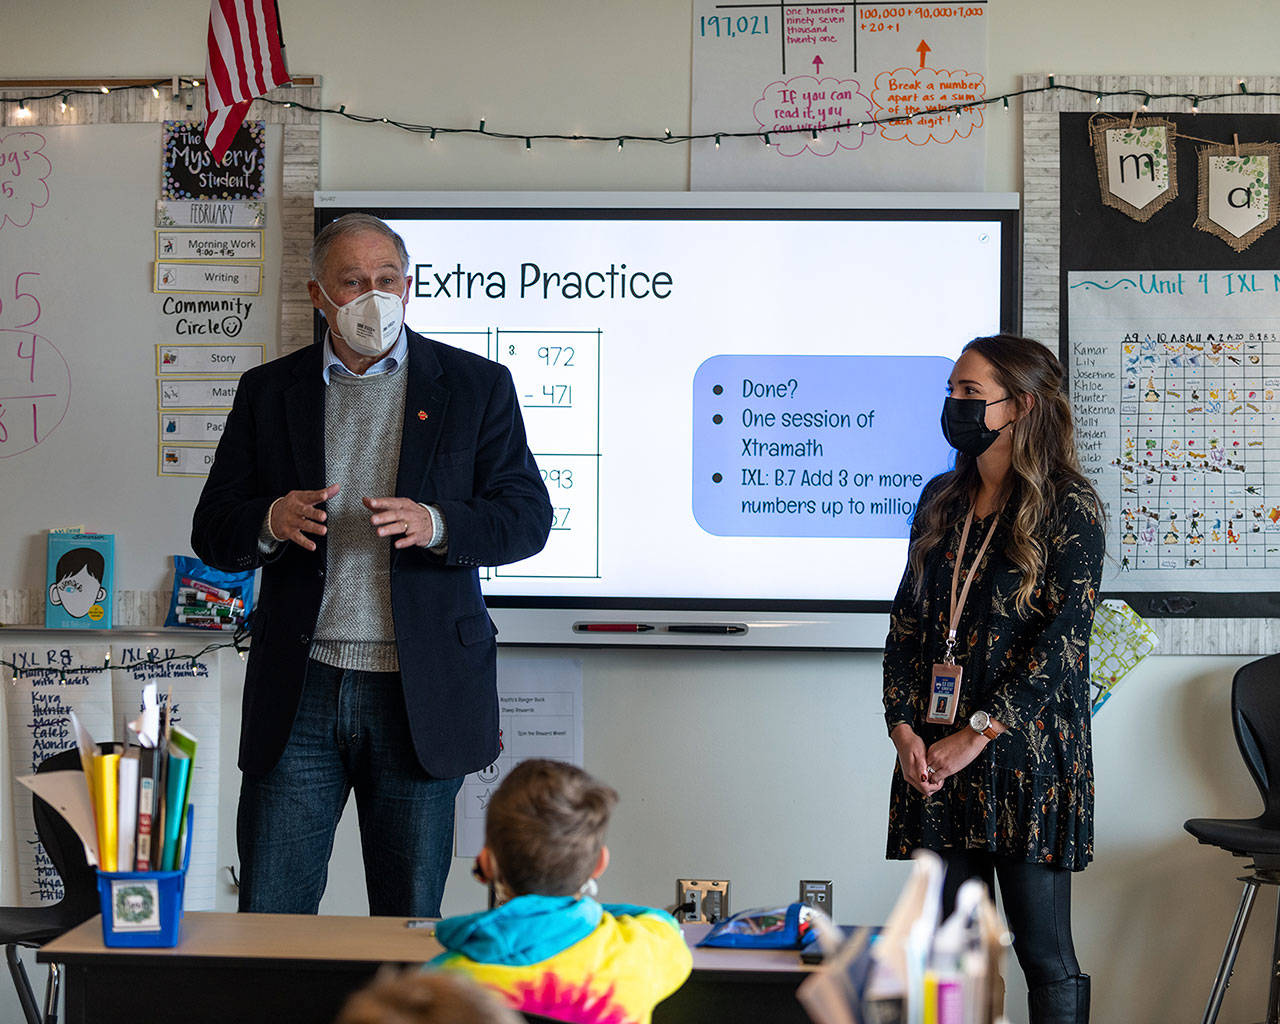 Gov. Jay Inslee visited Elk Ridge Elementary School in the White River School District on Feb. 2, 2021 as part of his push to re-open schools safety for teachers, students, and their families. Photo courtesy the White River School District